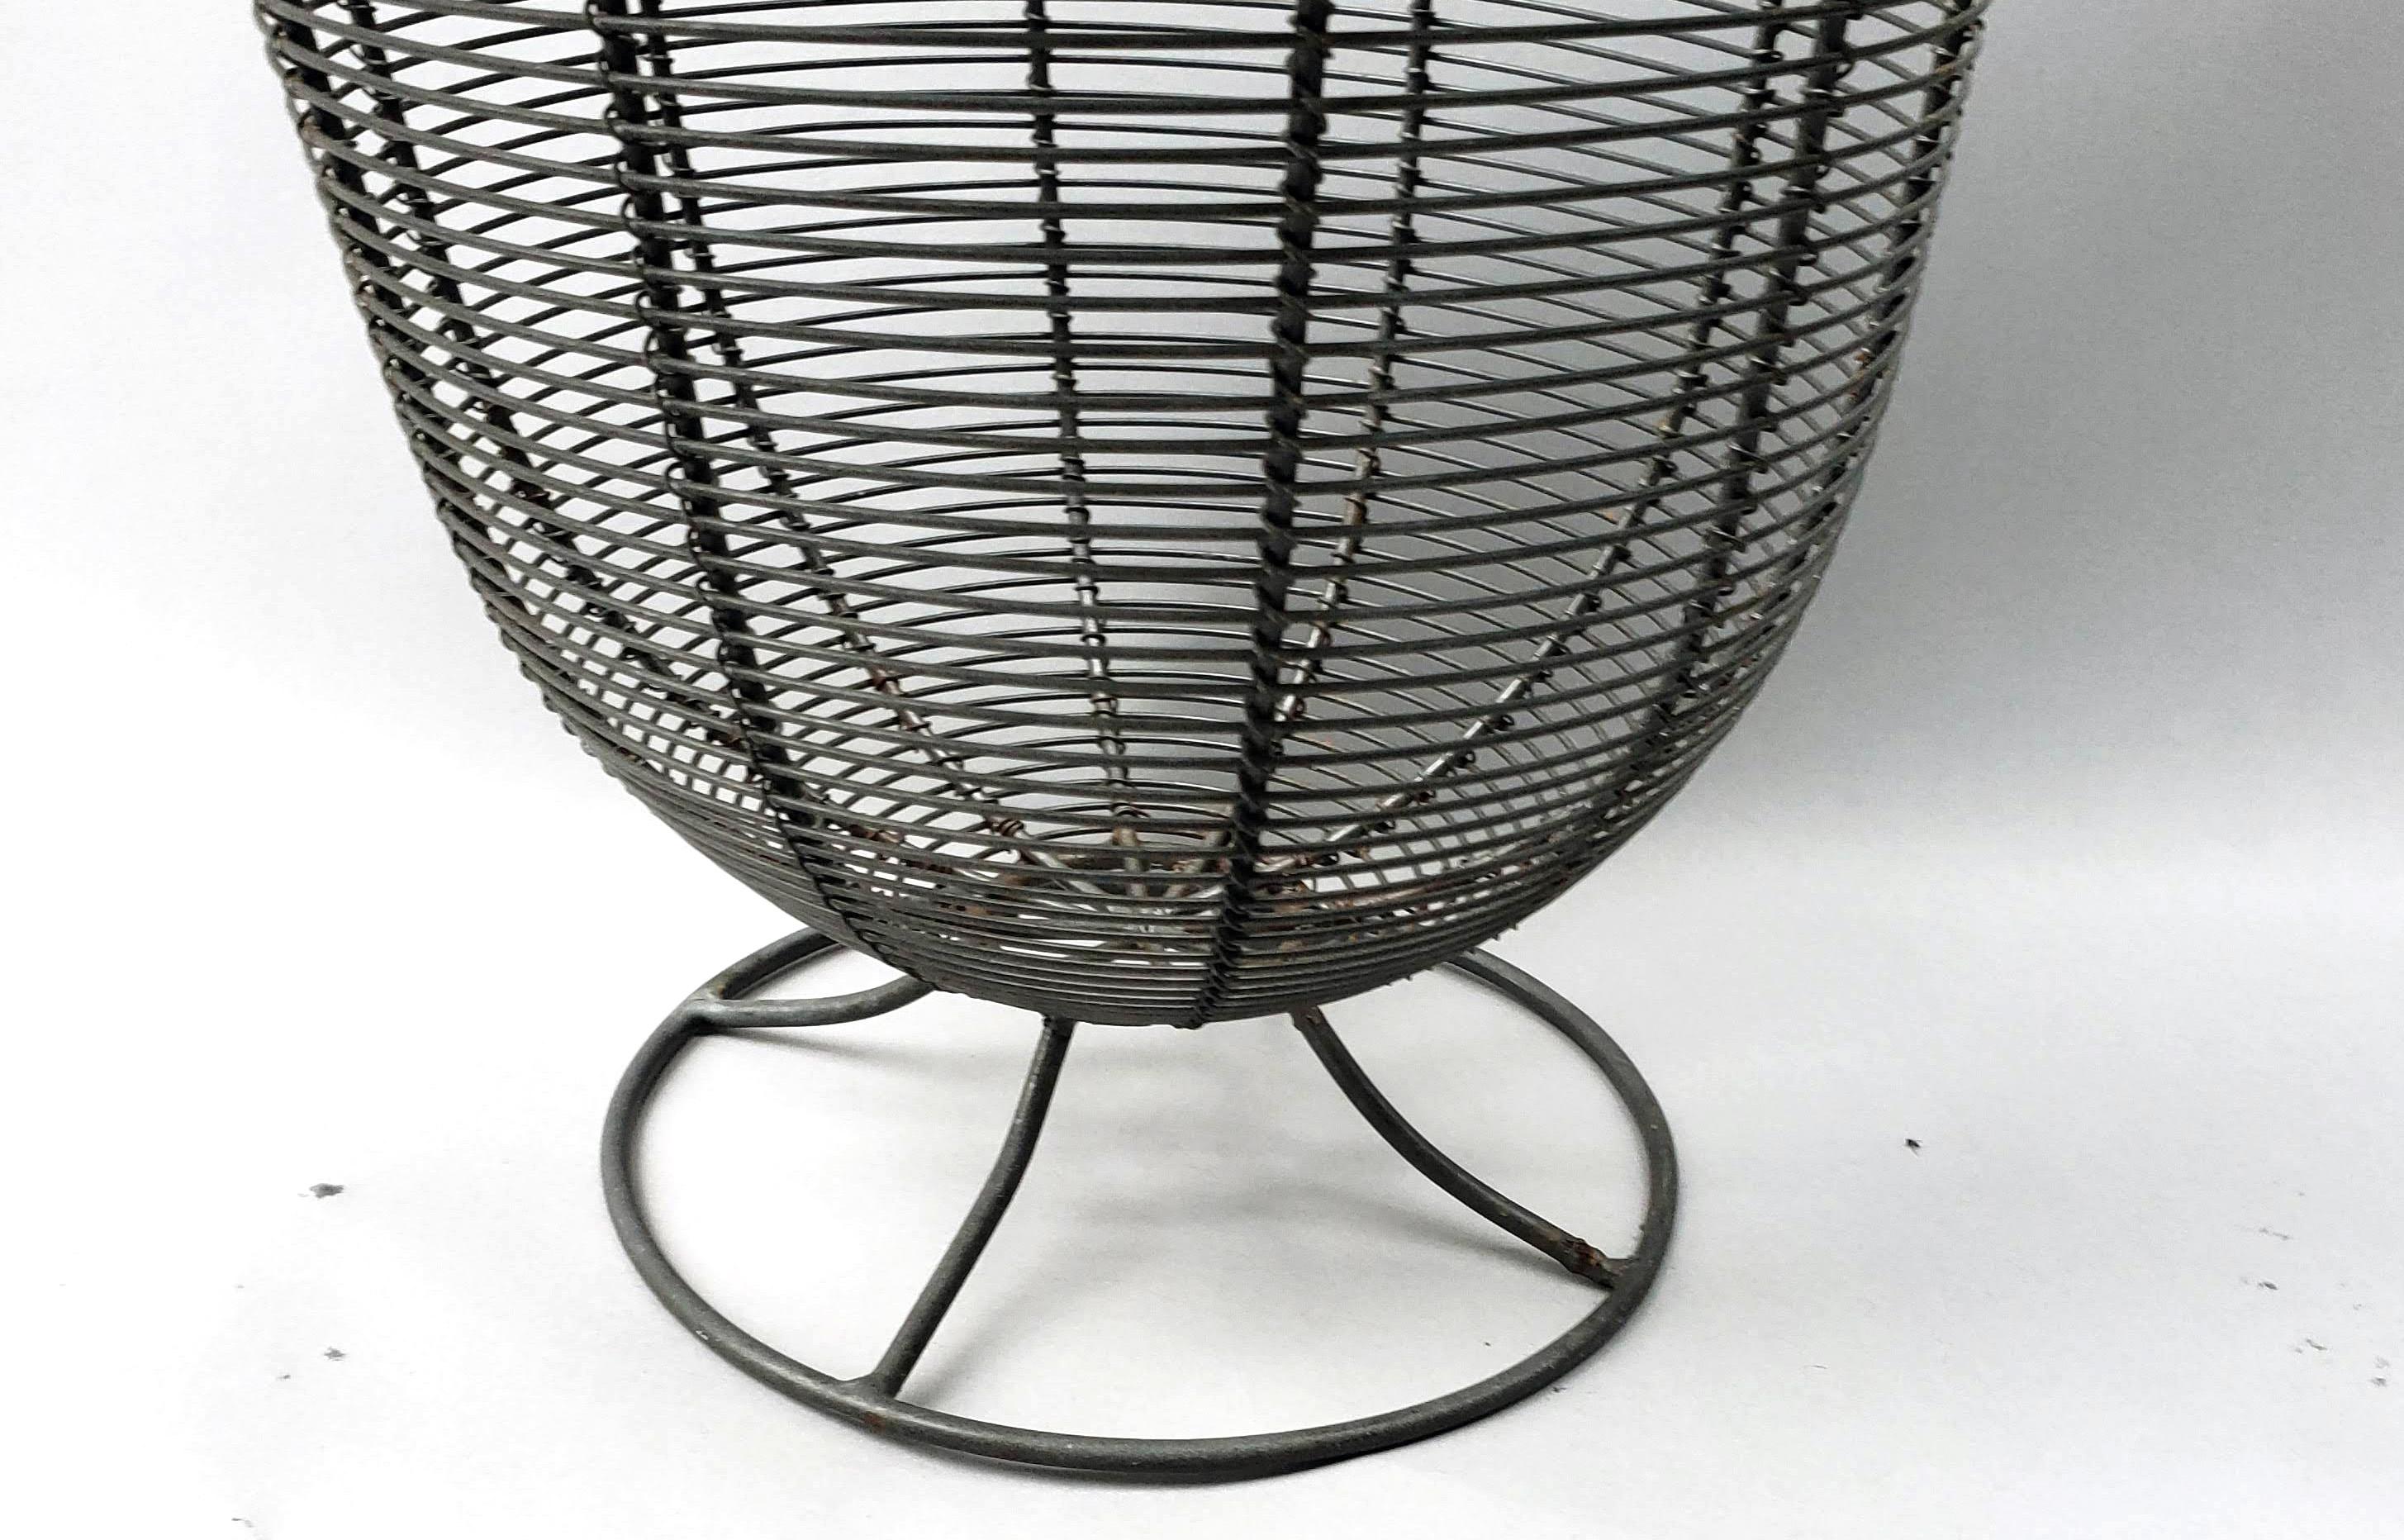 American wire basket, 
circa 1940.

An open-work wire basket on a circular open foot and with a flaring body and neck creating an incredibly elegant sculptural form.